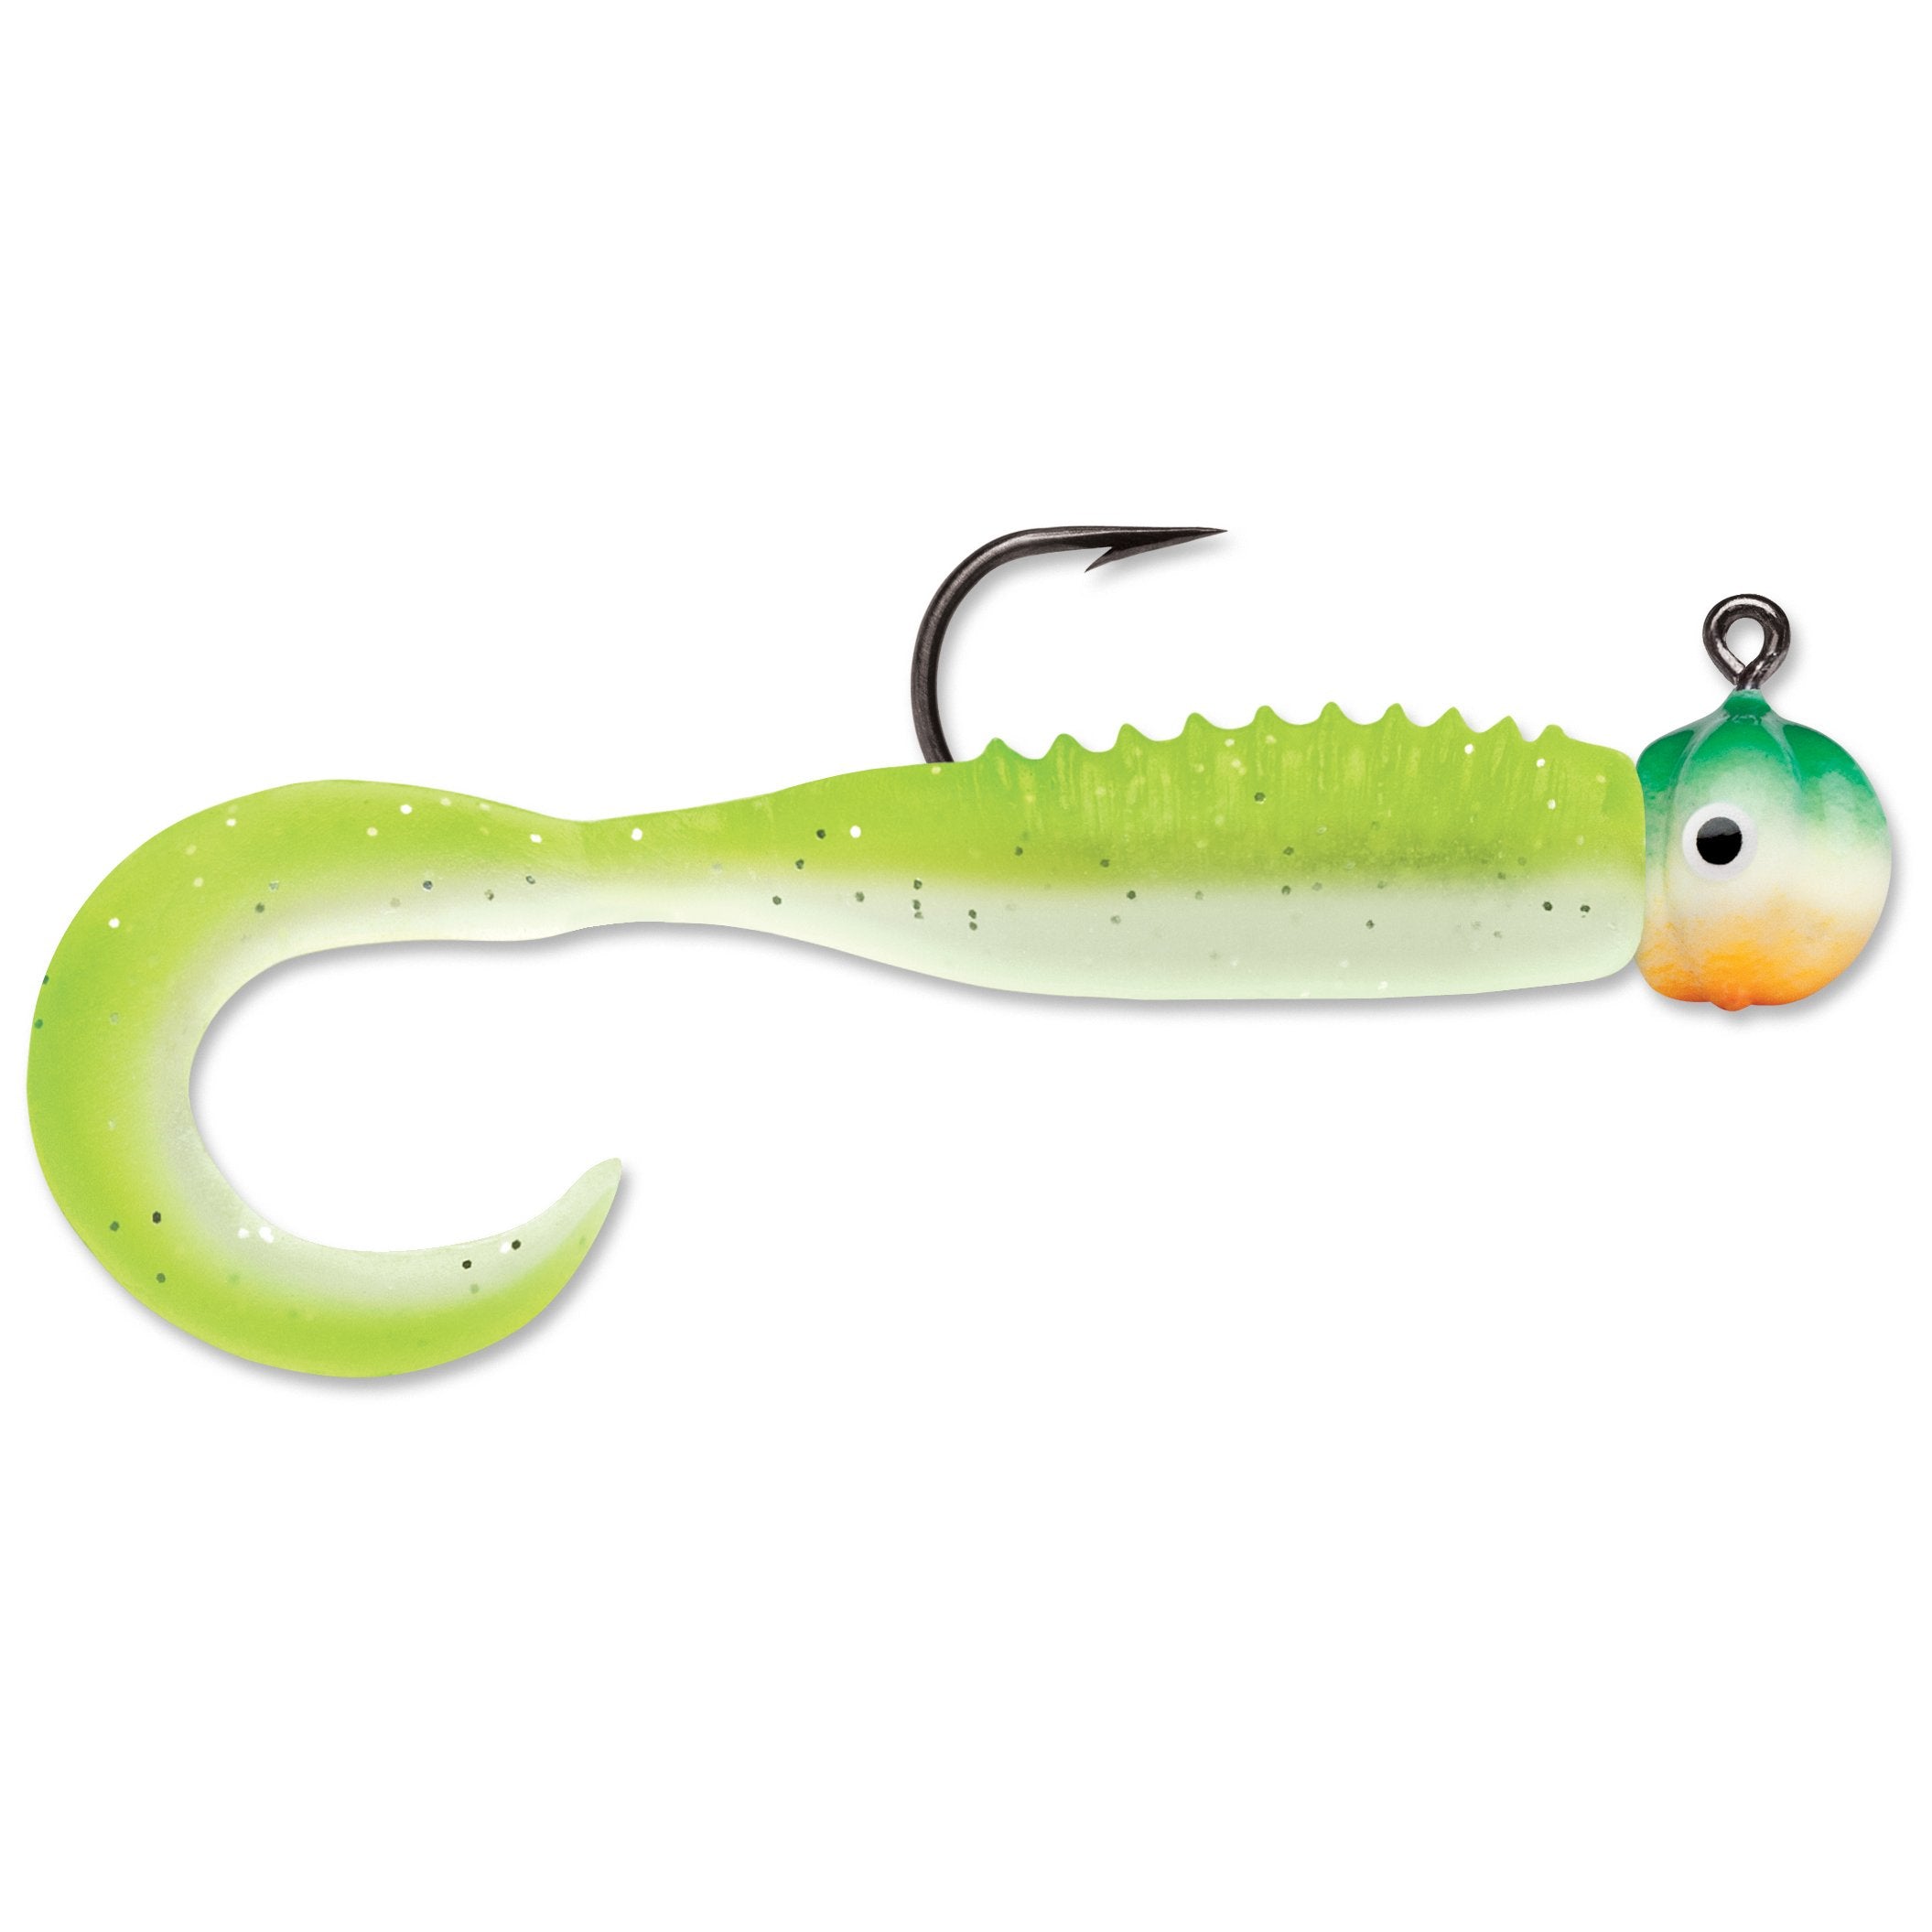 VMC Curl Tail Spinnerbait Black Chartreuse Glow / 1/8 oz